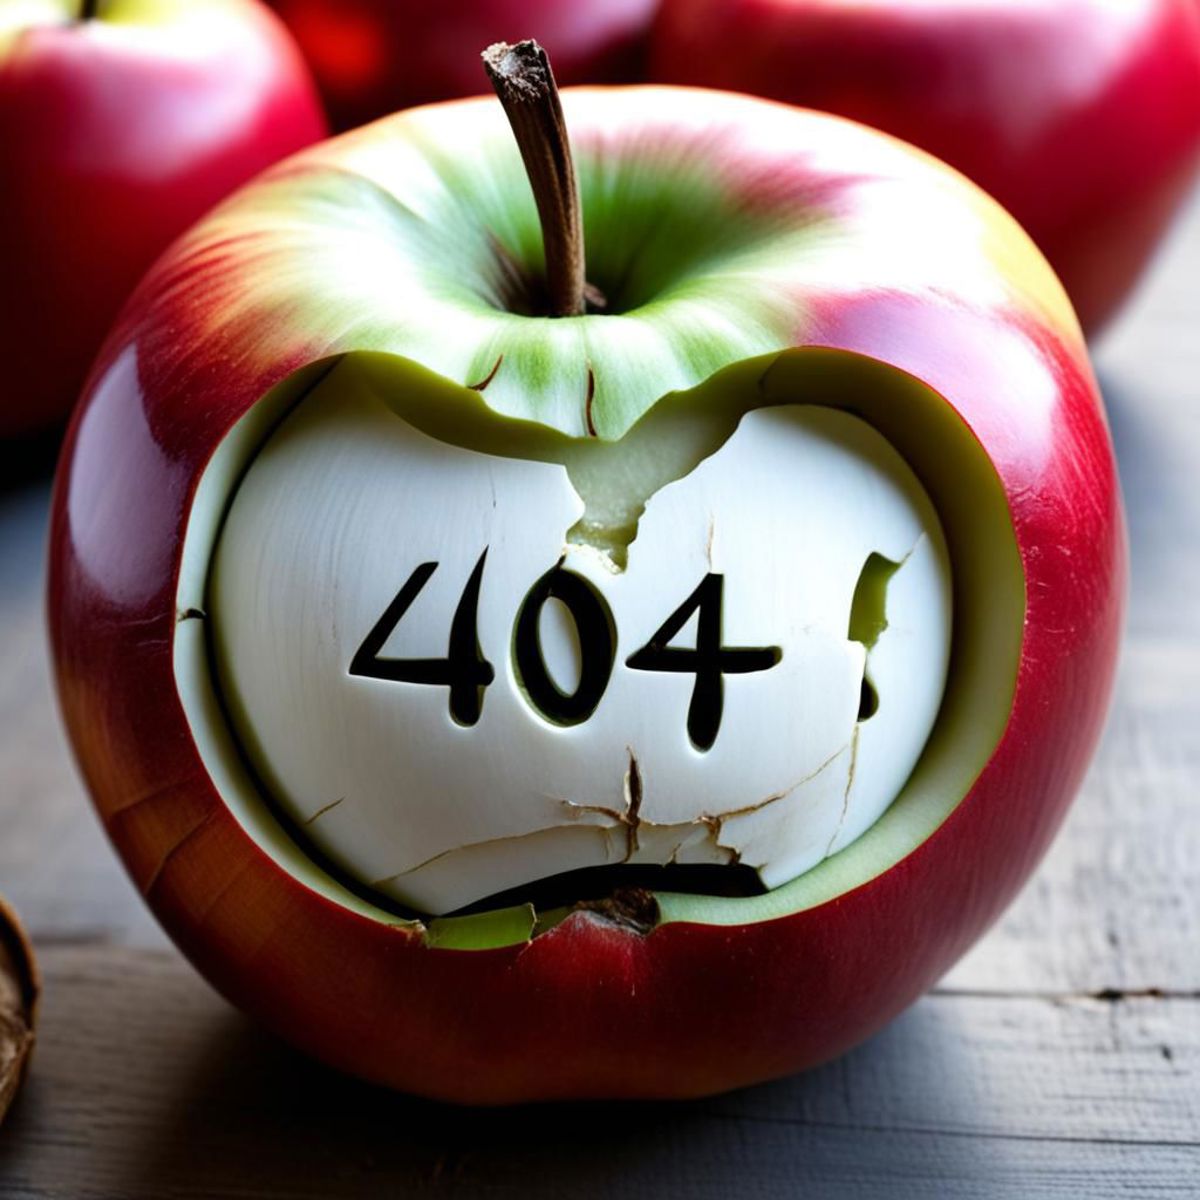 A red apple with a bite taken out of it and the number 404 written on the side.